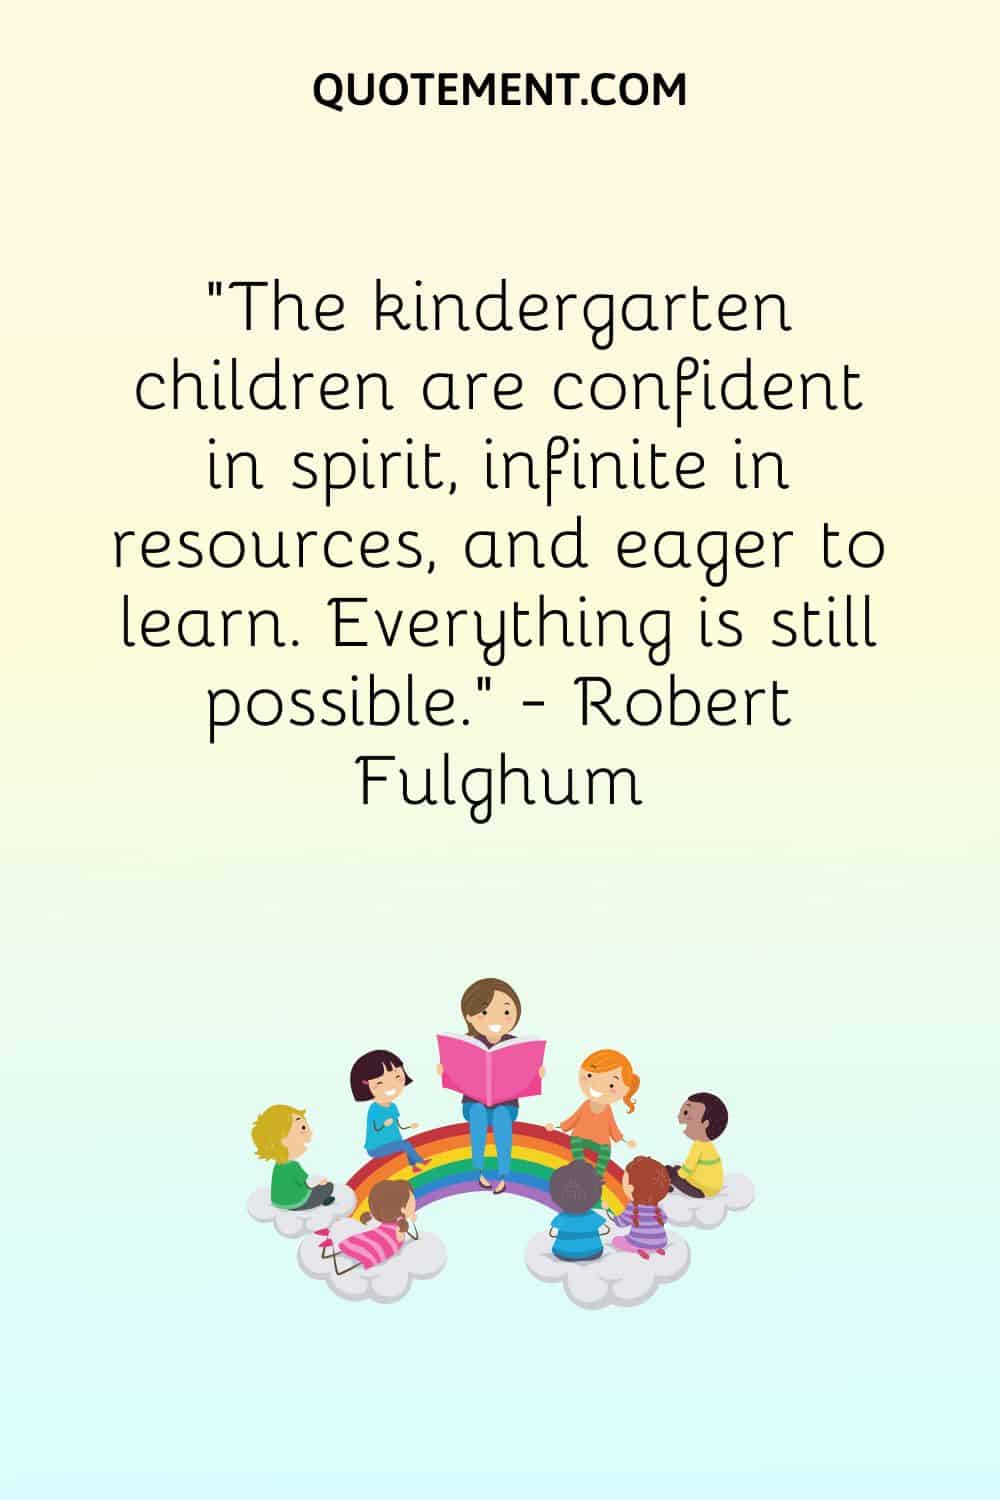 The kindergarten children are confident in spirit, infinite in resources, and eager to learn.